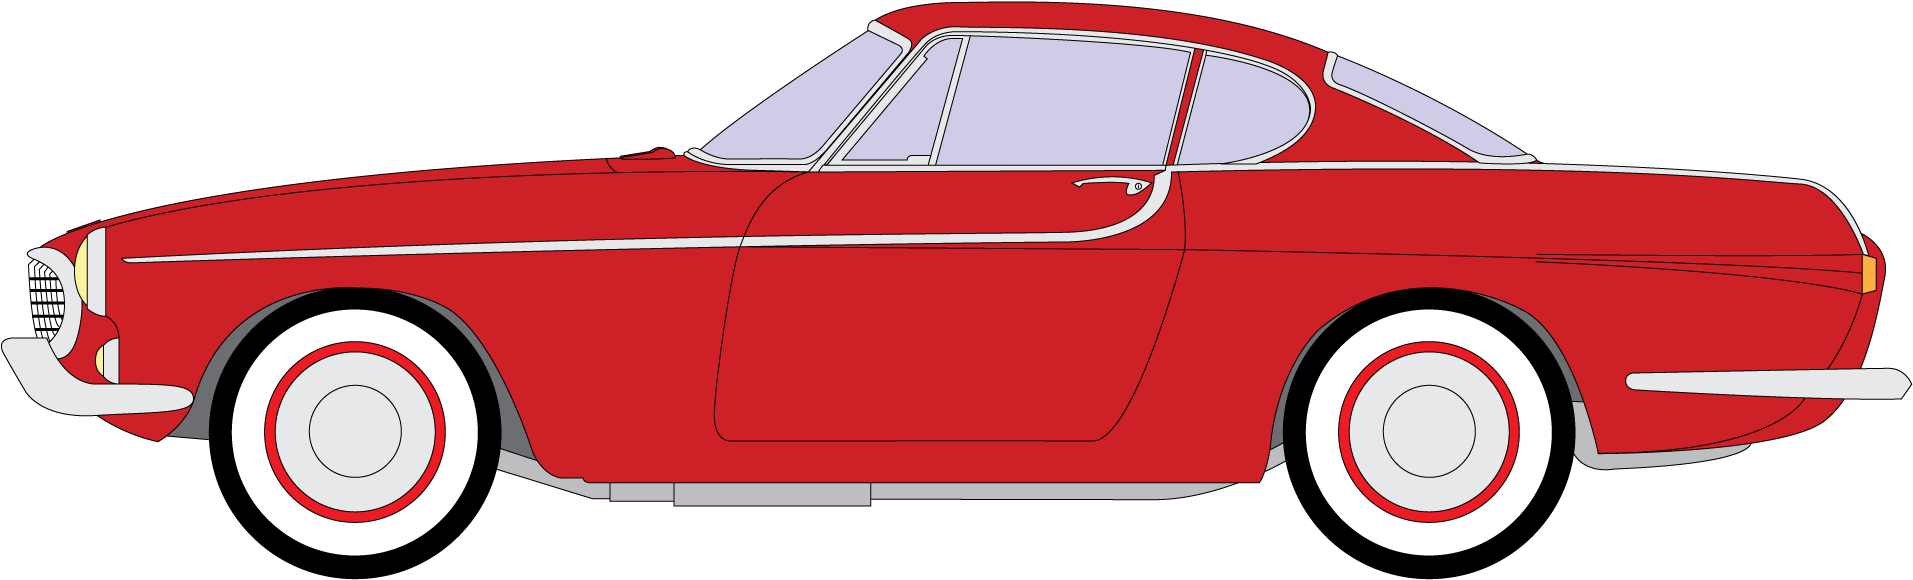 Volvo P1800 Png Clipart - Volvo P1800, Transparent Png